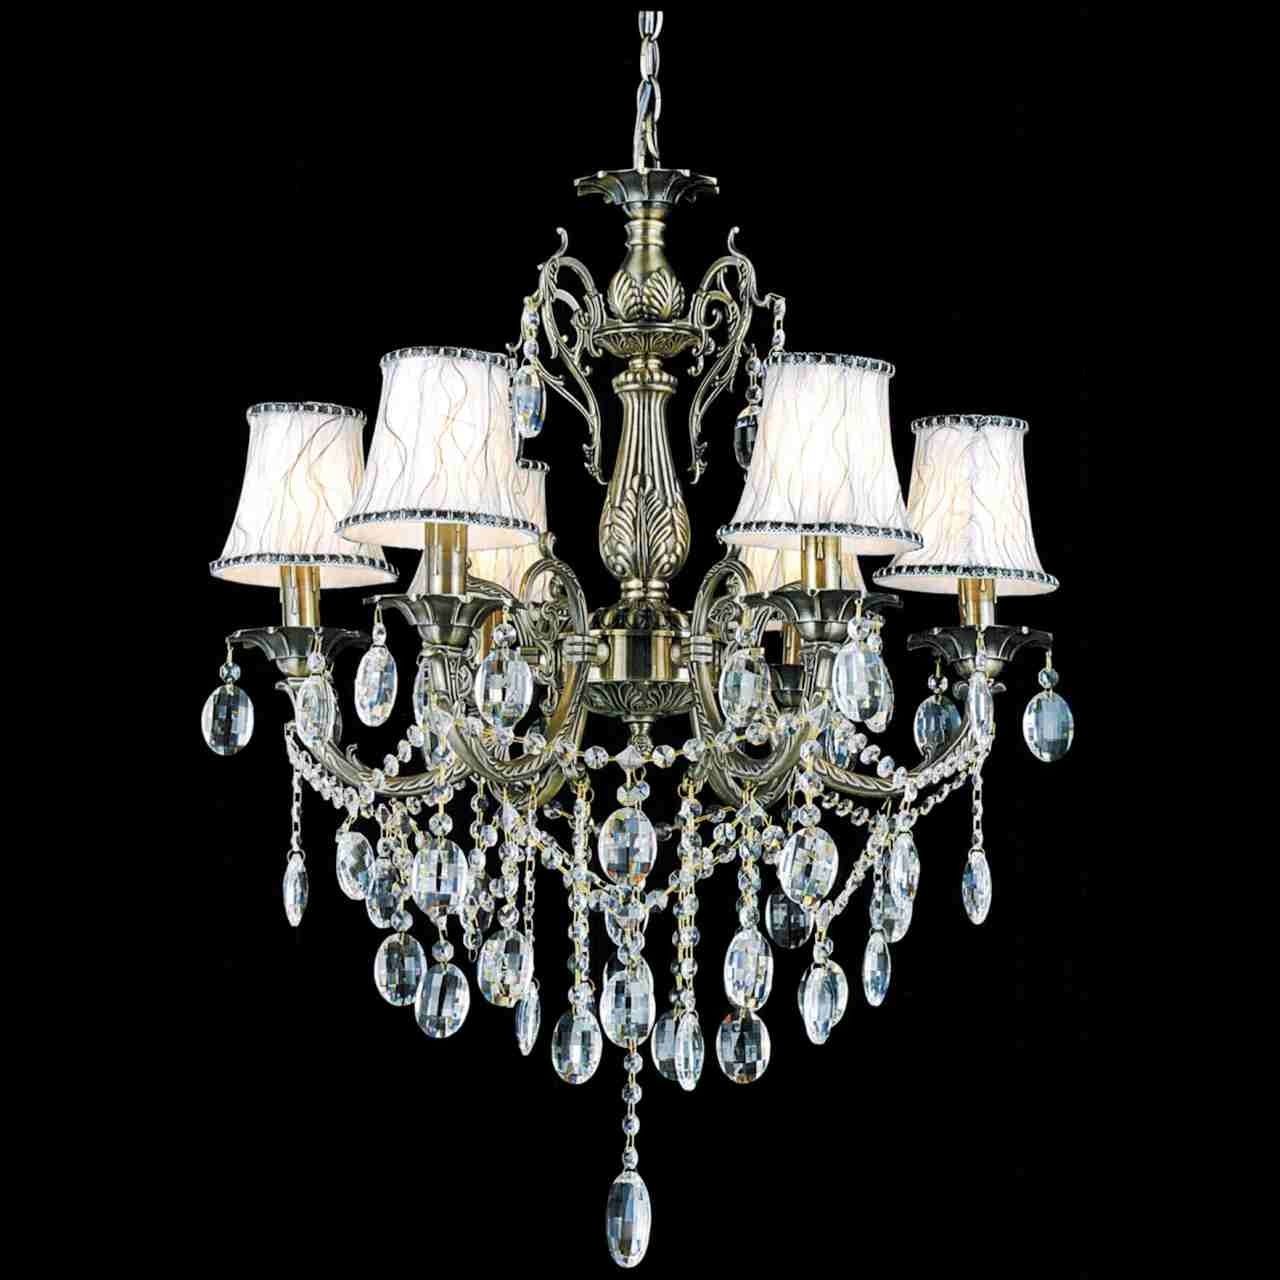 Chandelier Lamp Shades Regarding Current Brizzo Lighting Stores (View 11 of 15)